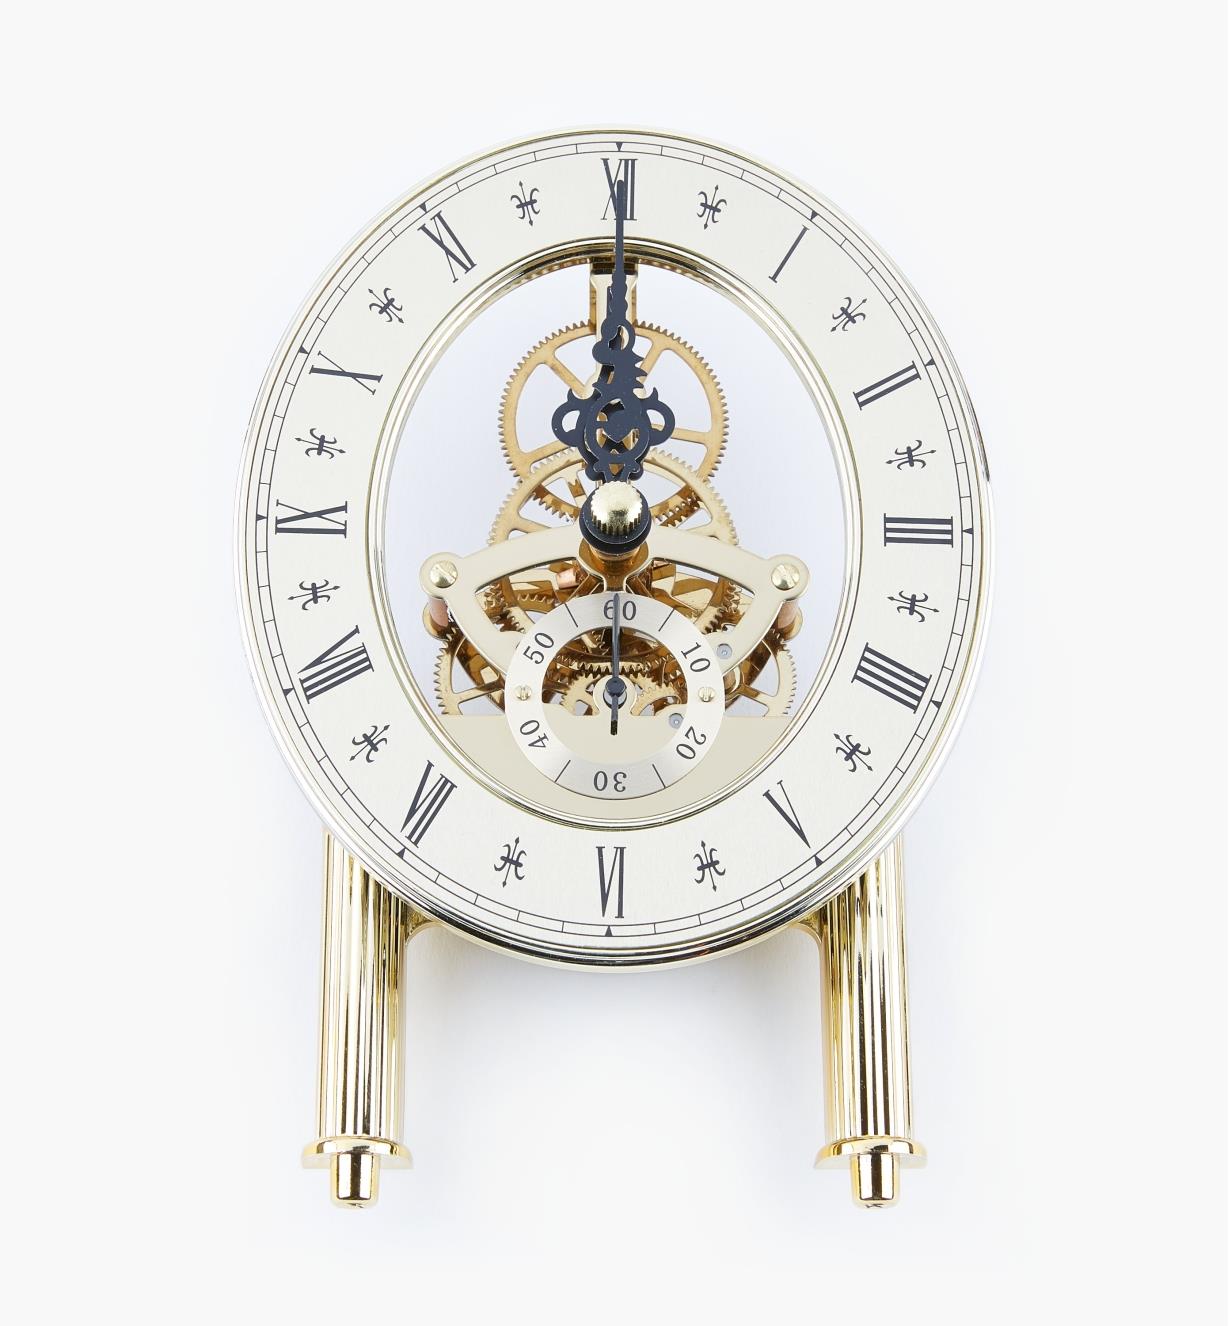 Anniversary Quartz Skeleton Clock Movement With OVAL Dial Gold 5 7/8" Tall 